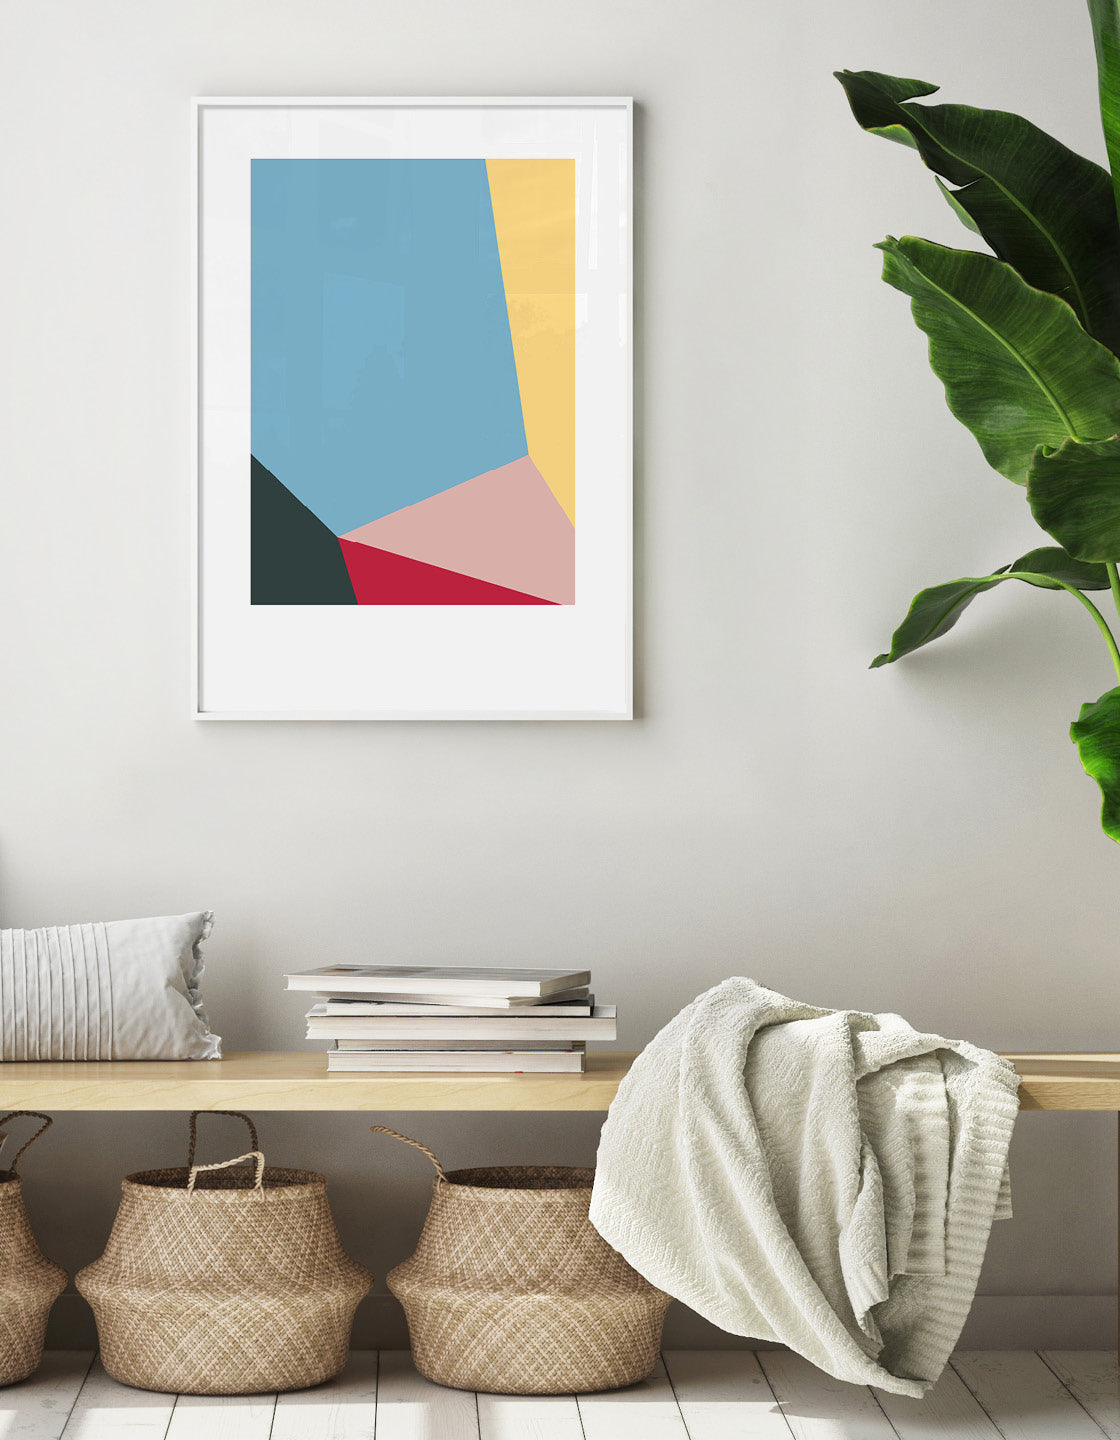 Modern minimal abstract art prints for a gallery wall